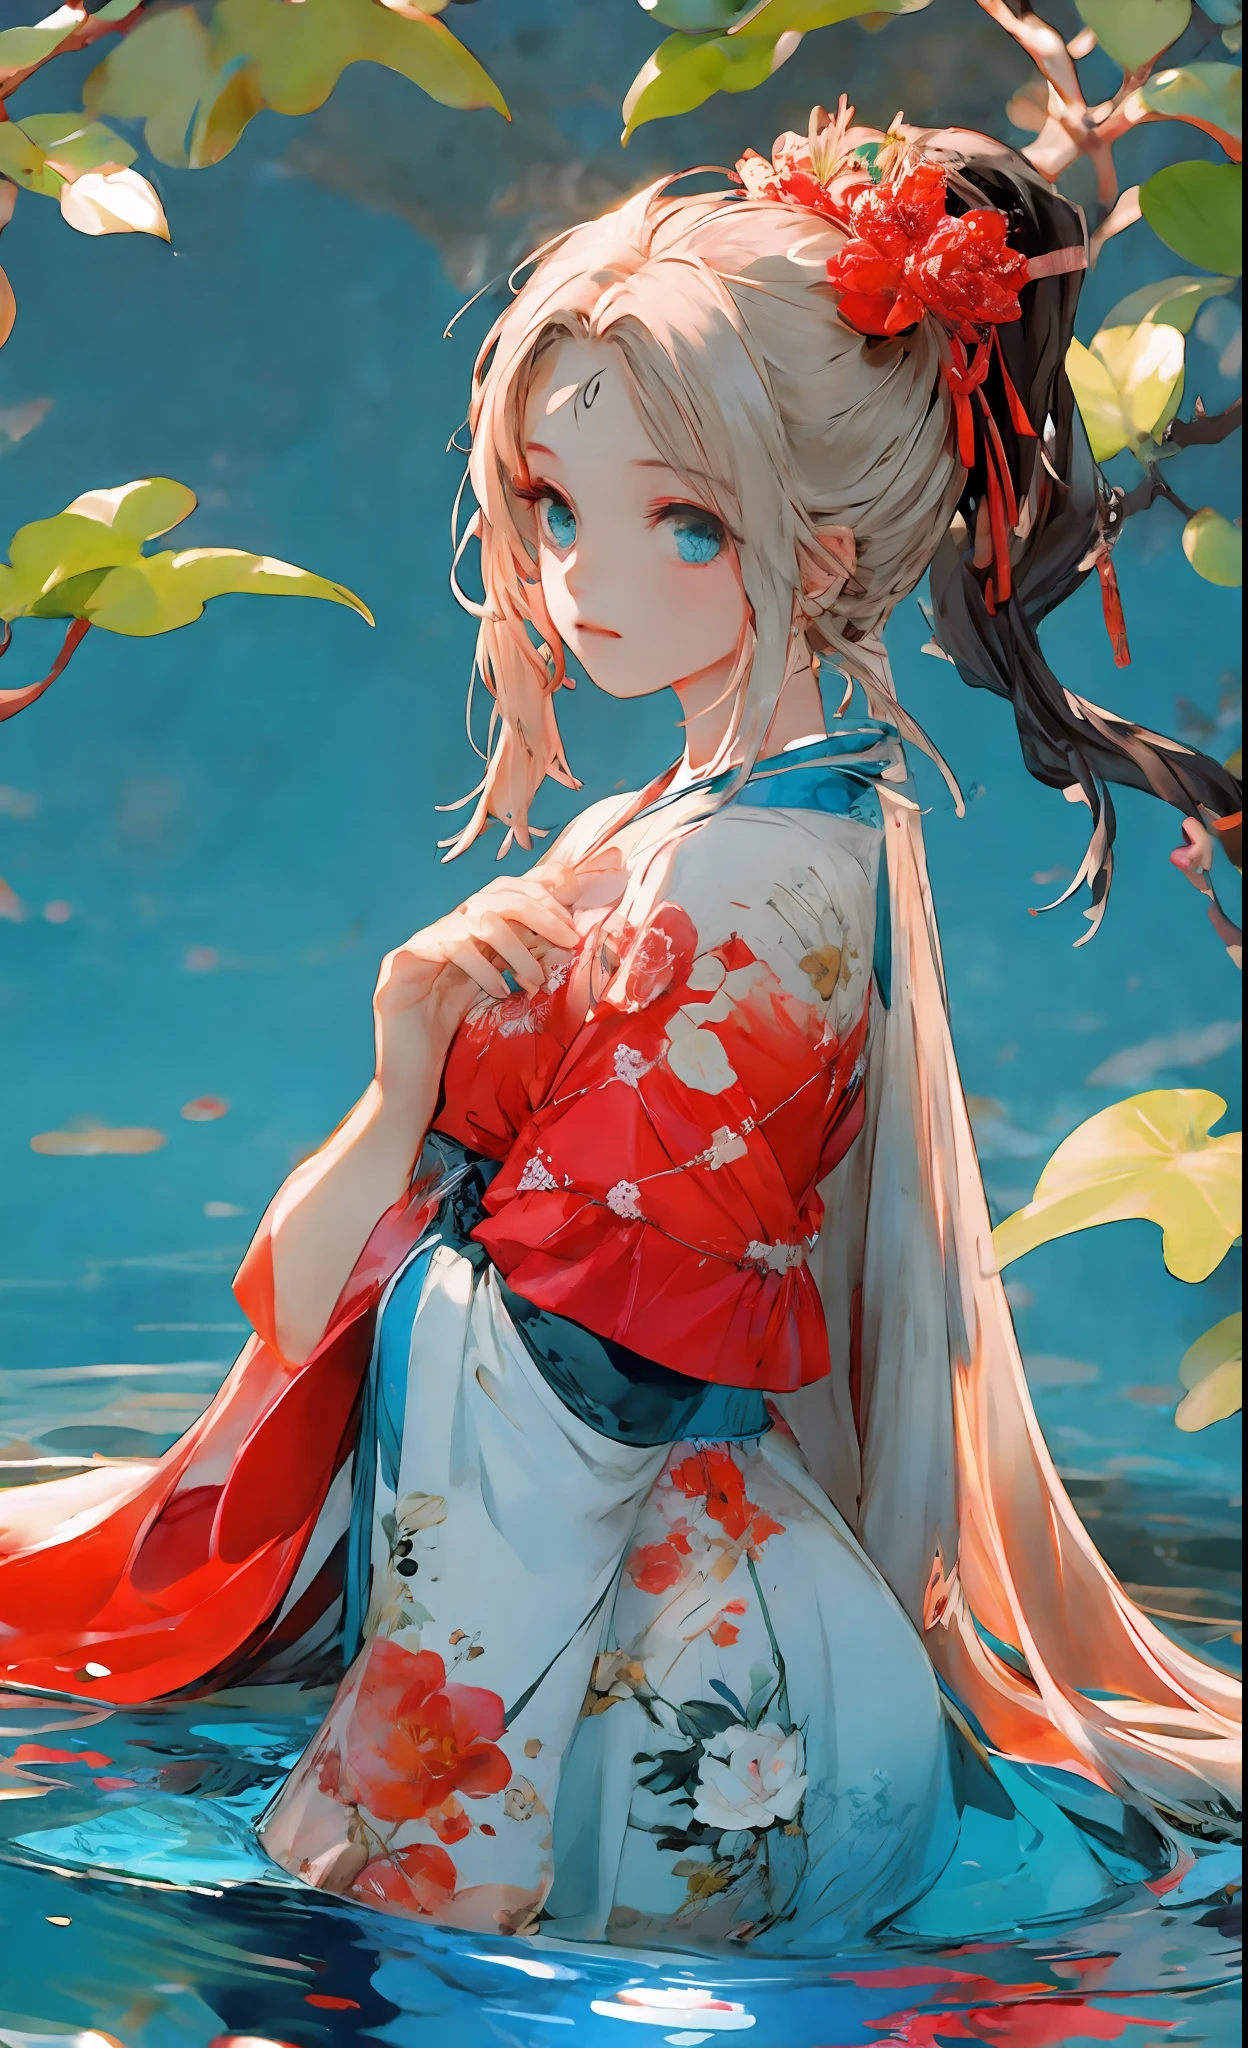 Cold facial features, high nose bridge, slender eyes, hanging eyes, adult female, thirty-year-old female, serious expression, cold, masterpiece, best quality, official art, 8k wallpaper, very detailed, a girl, ancient chinese clothing, full body, sunlight, clear face, clean white background, masterpiece, super detail, epic composition, ultra hd, high quality, extremely detailed, official art, uniform 8k wallpaper, super detail, 32k red pupils, an extremely delicate and beautiful girl, 8k wallpaper, Best quality, full body close-up, white long dress, luxurious silky bright red chiffon flood (illusion, glitter, ultra-thin, soft,) Hanfu illustration, 1 girl, sky blue hair, long hair, detailed eyes, Forrest Gump, bare shoulders, Hanfu, lake, pure, soft smile, bamboo, tea, high quality, masterpiece, masterpiece, exquisite facial features, delicate hair, delicate eyes, delicate colored hair, 4K picture quality, brilliant light and shadow, Tyndall effect, halo, messy hair, youthful state, gorgeous scene, exquisite clothes, chains , feathers, big eyes of ancient Chinese beauties very detailed, digital painting, artstation, concept art, clear focus, illustration, art by Greg Rutkowski and Alphonse Mucha and Victo ngai